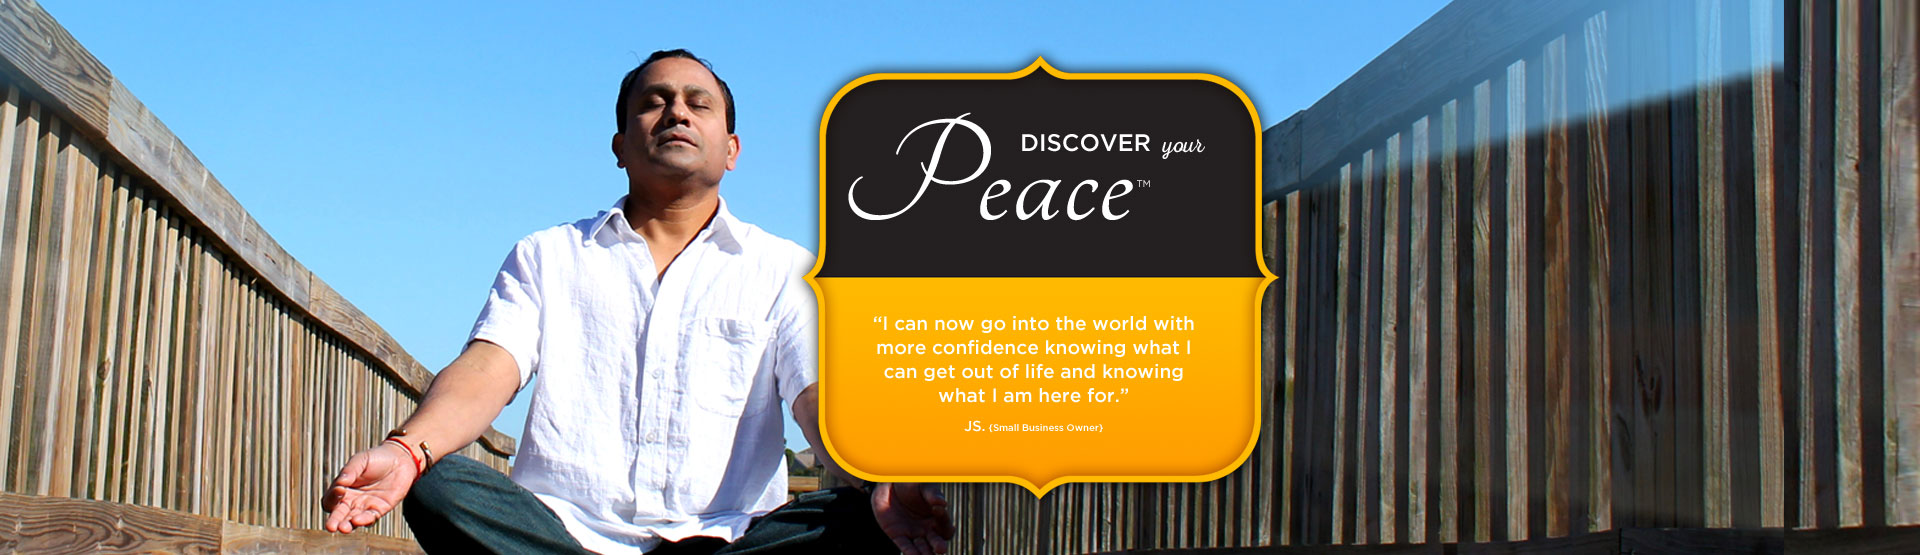 Amazing Raj - Discover your Peace